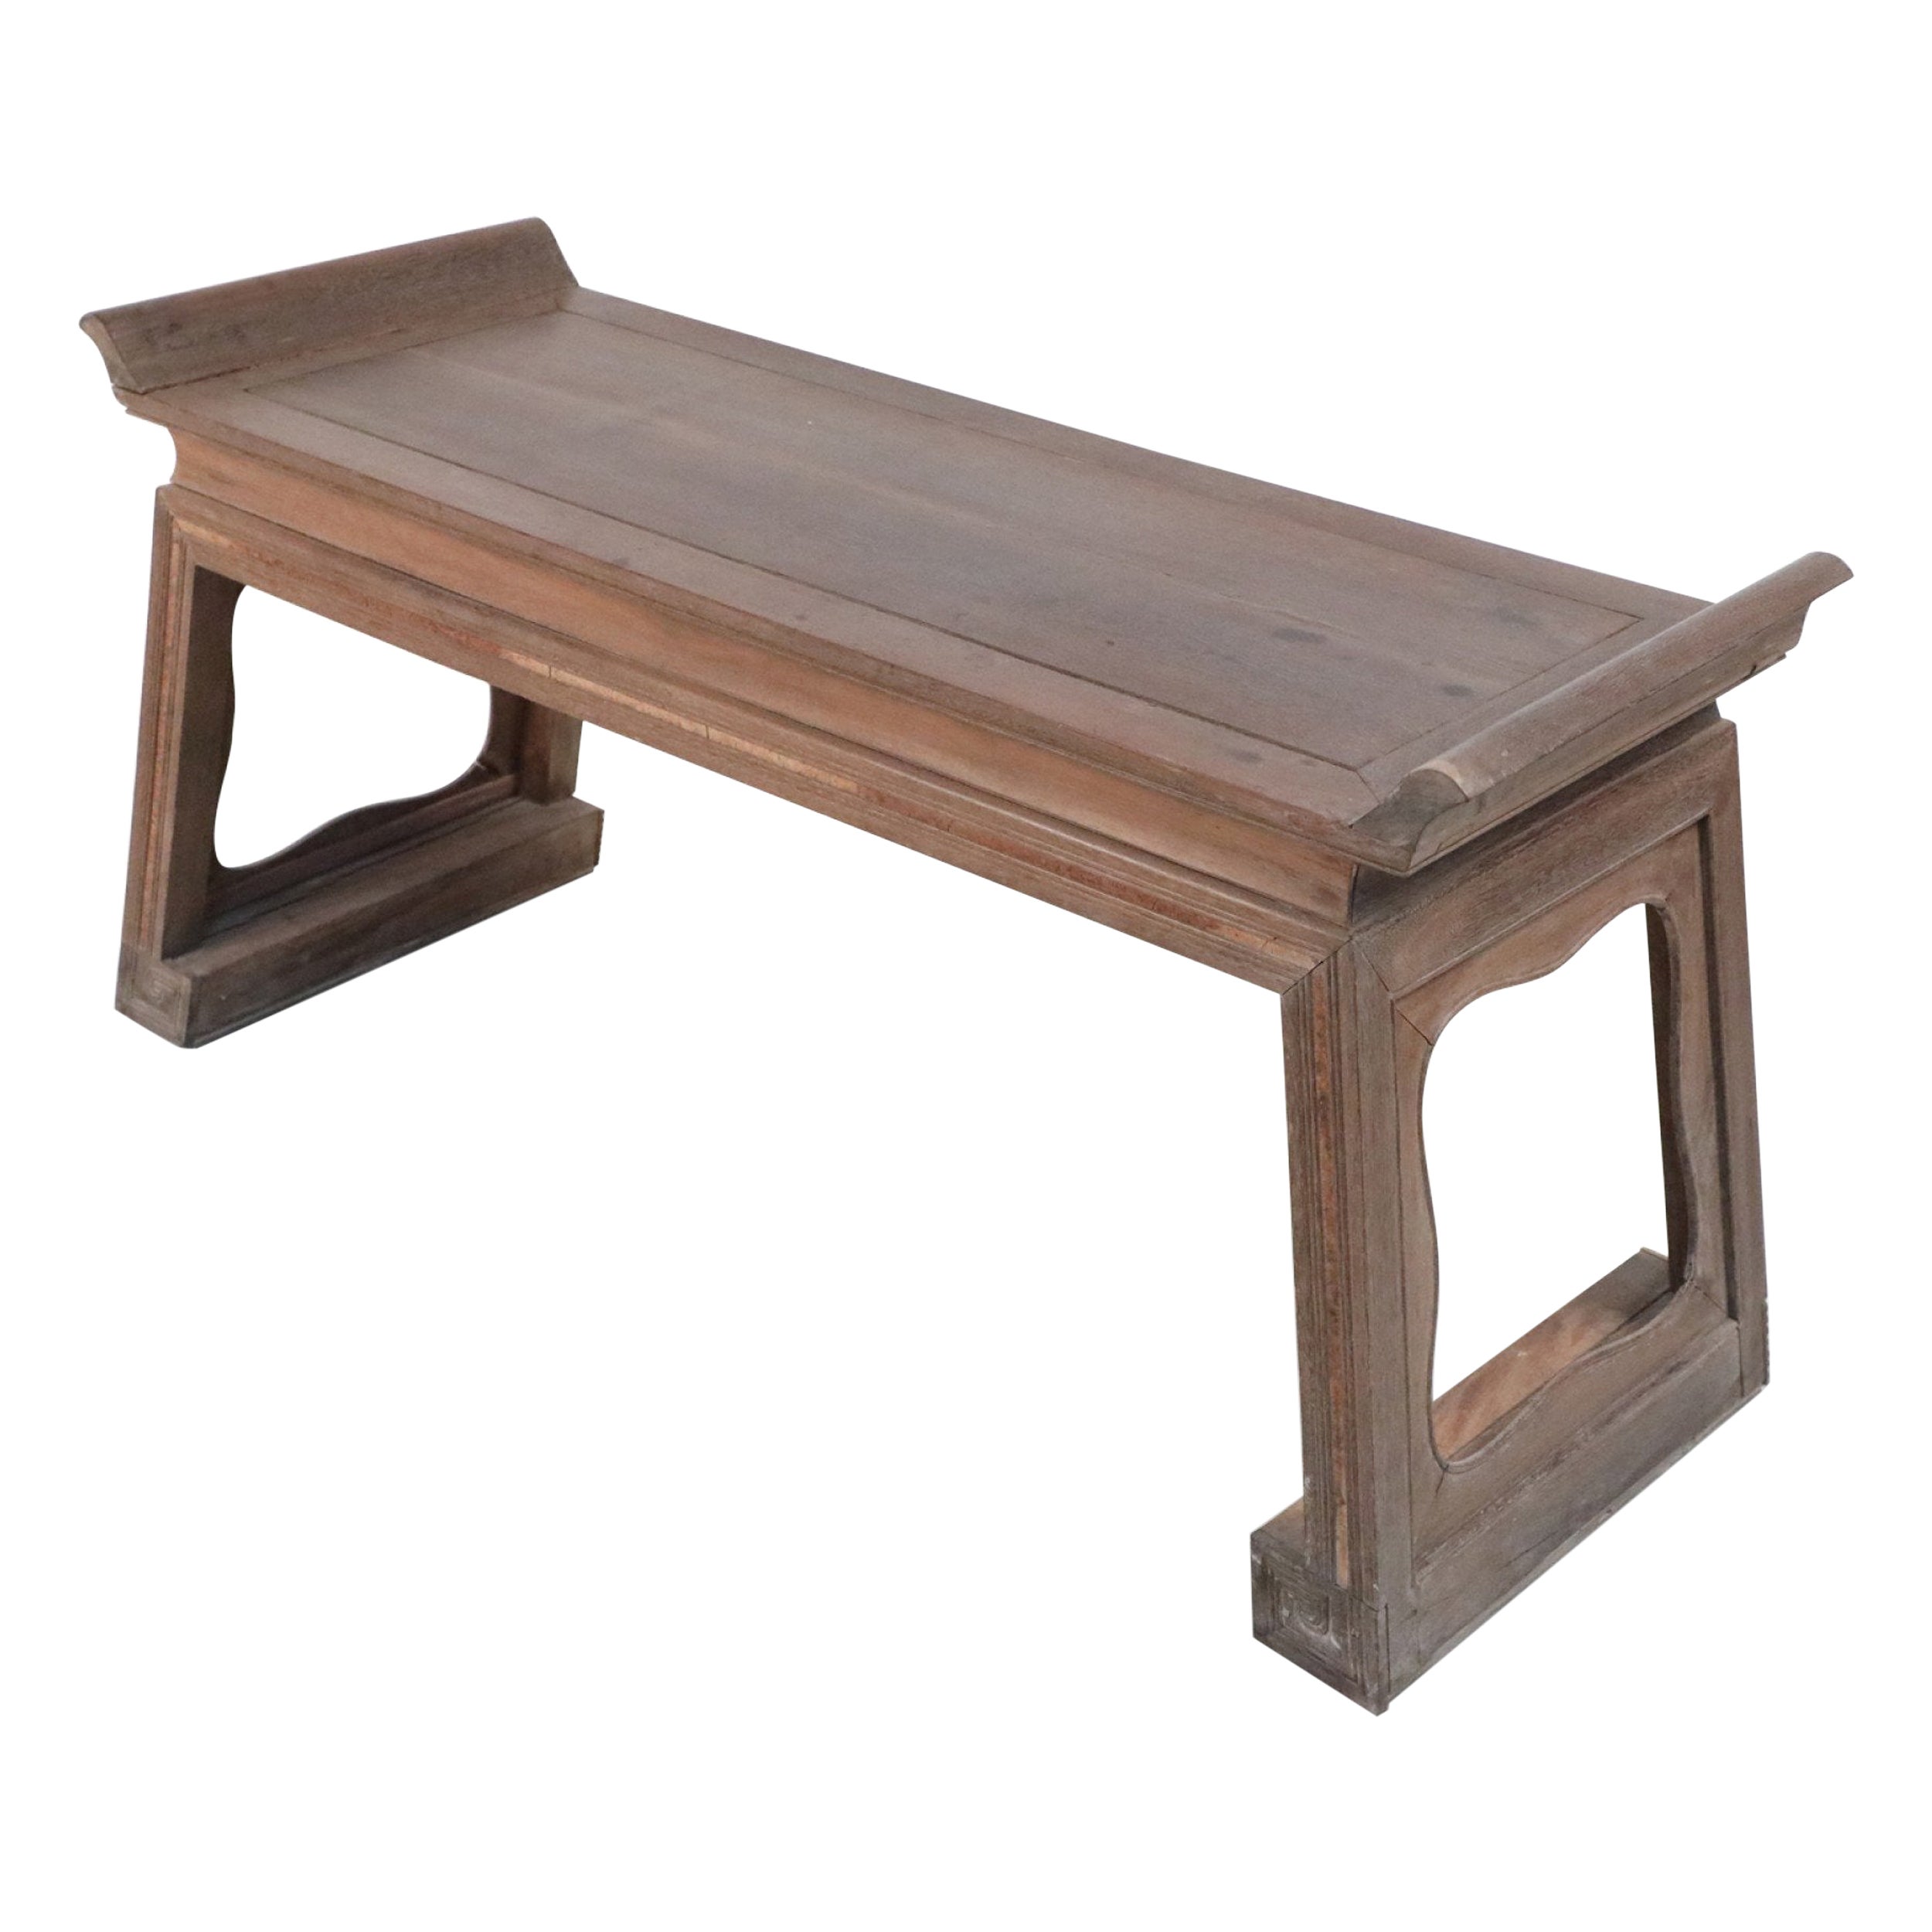 What makes rosewood furniture good quality?